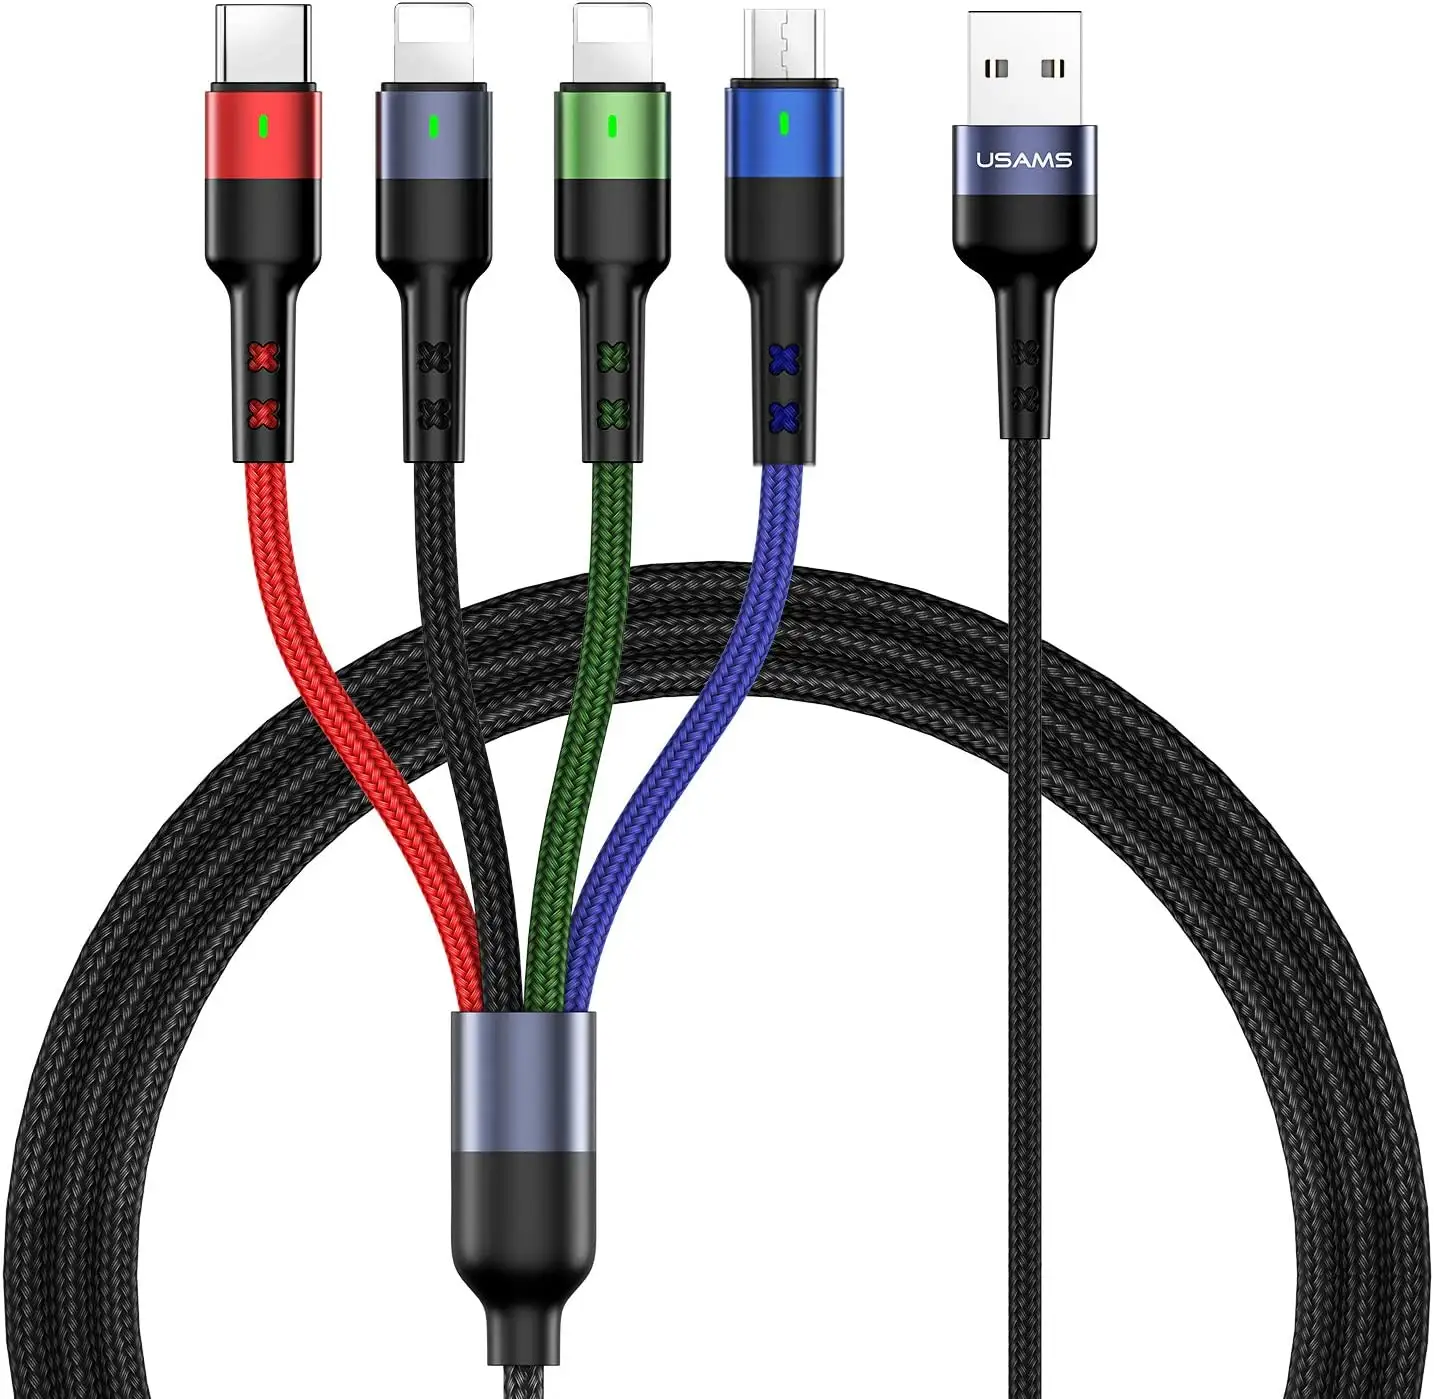 Multi Charging Cable 2 Pack 4FT 4 in1 USB Fast Charing Cord Adapter Type C Micro USB Port Connectors